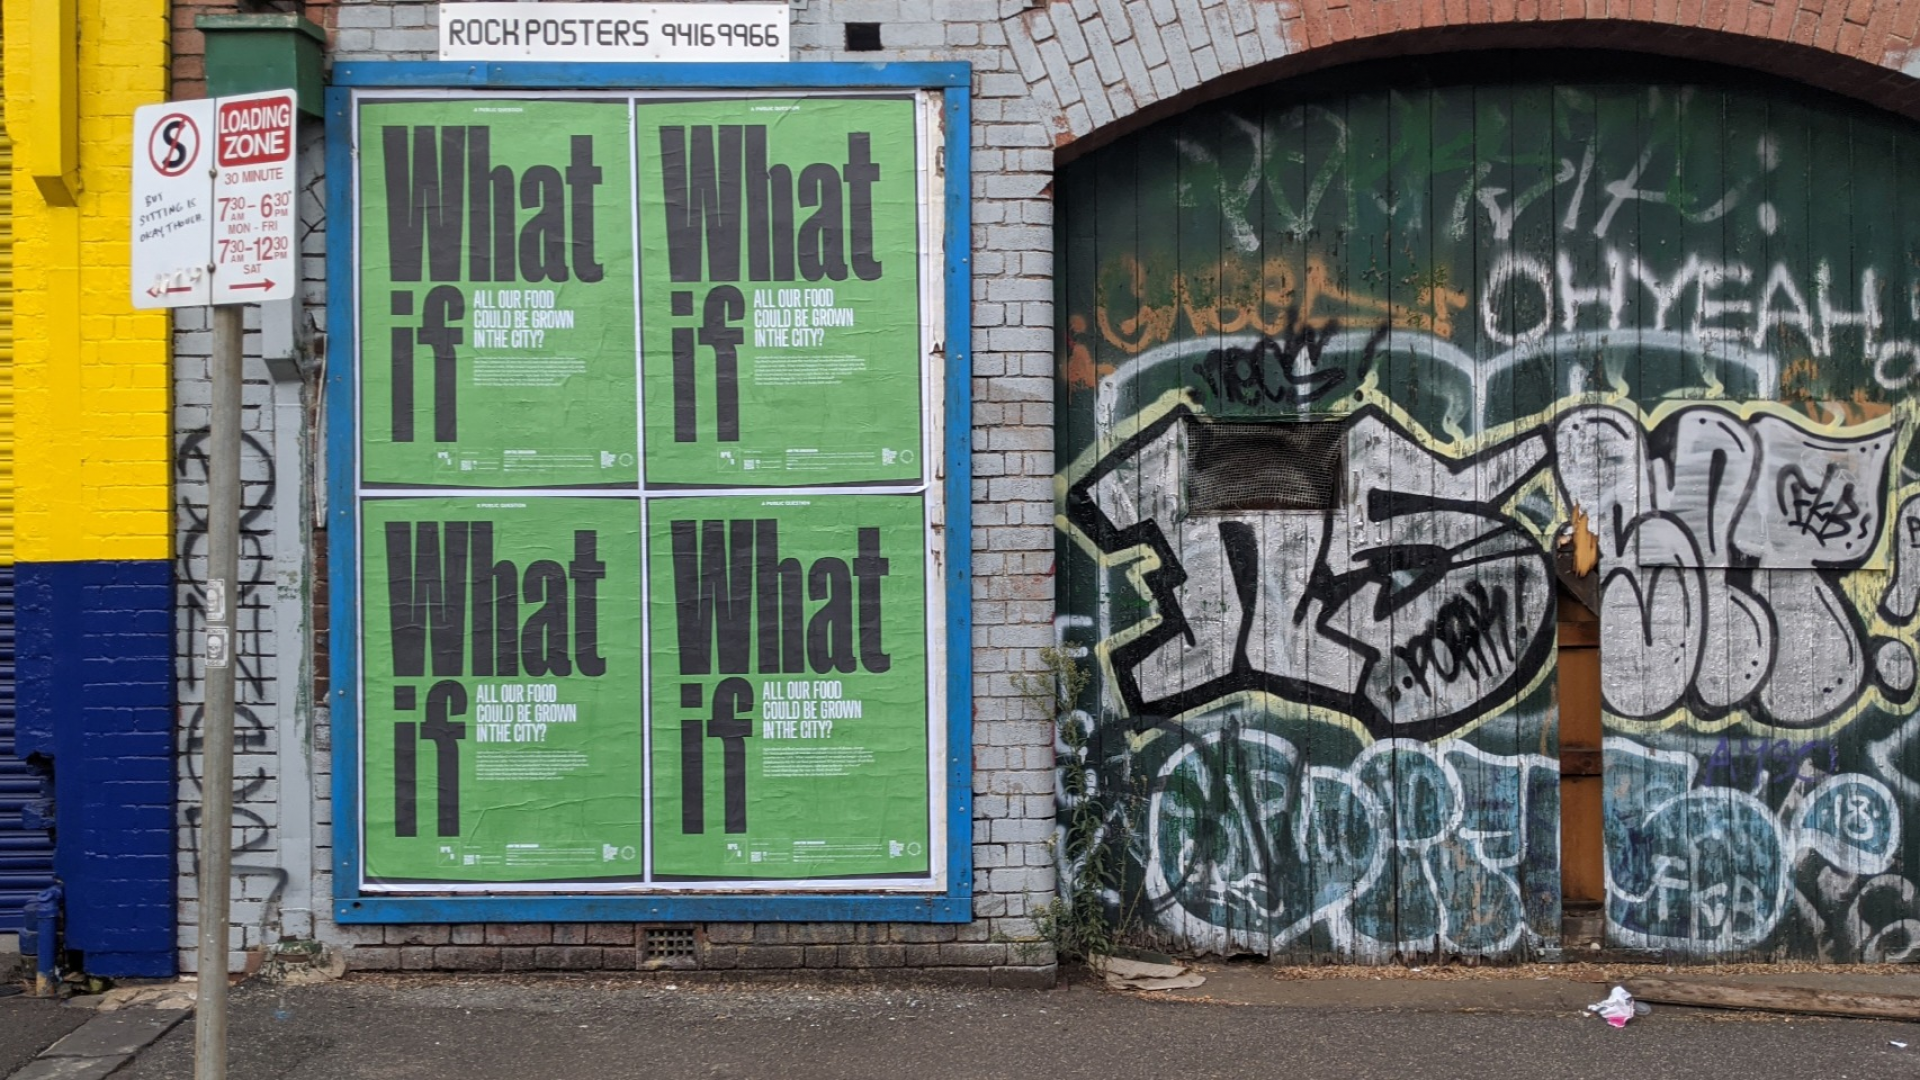 Four green posters are arranged in a grid on a heavily graffiti'd wall. The posters say 